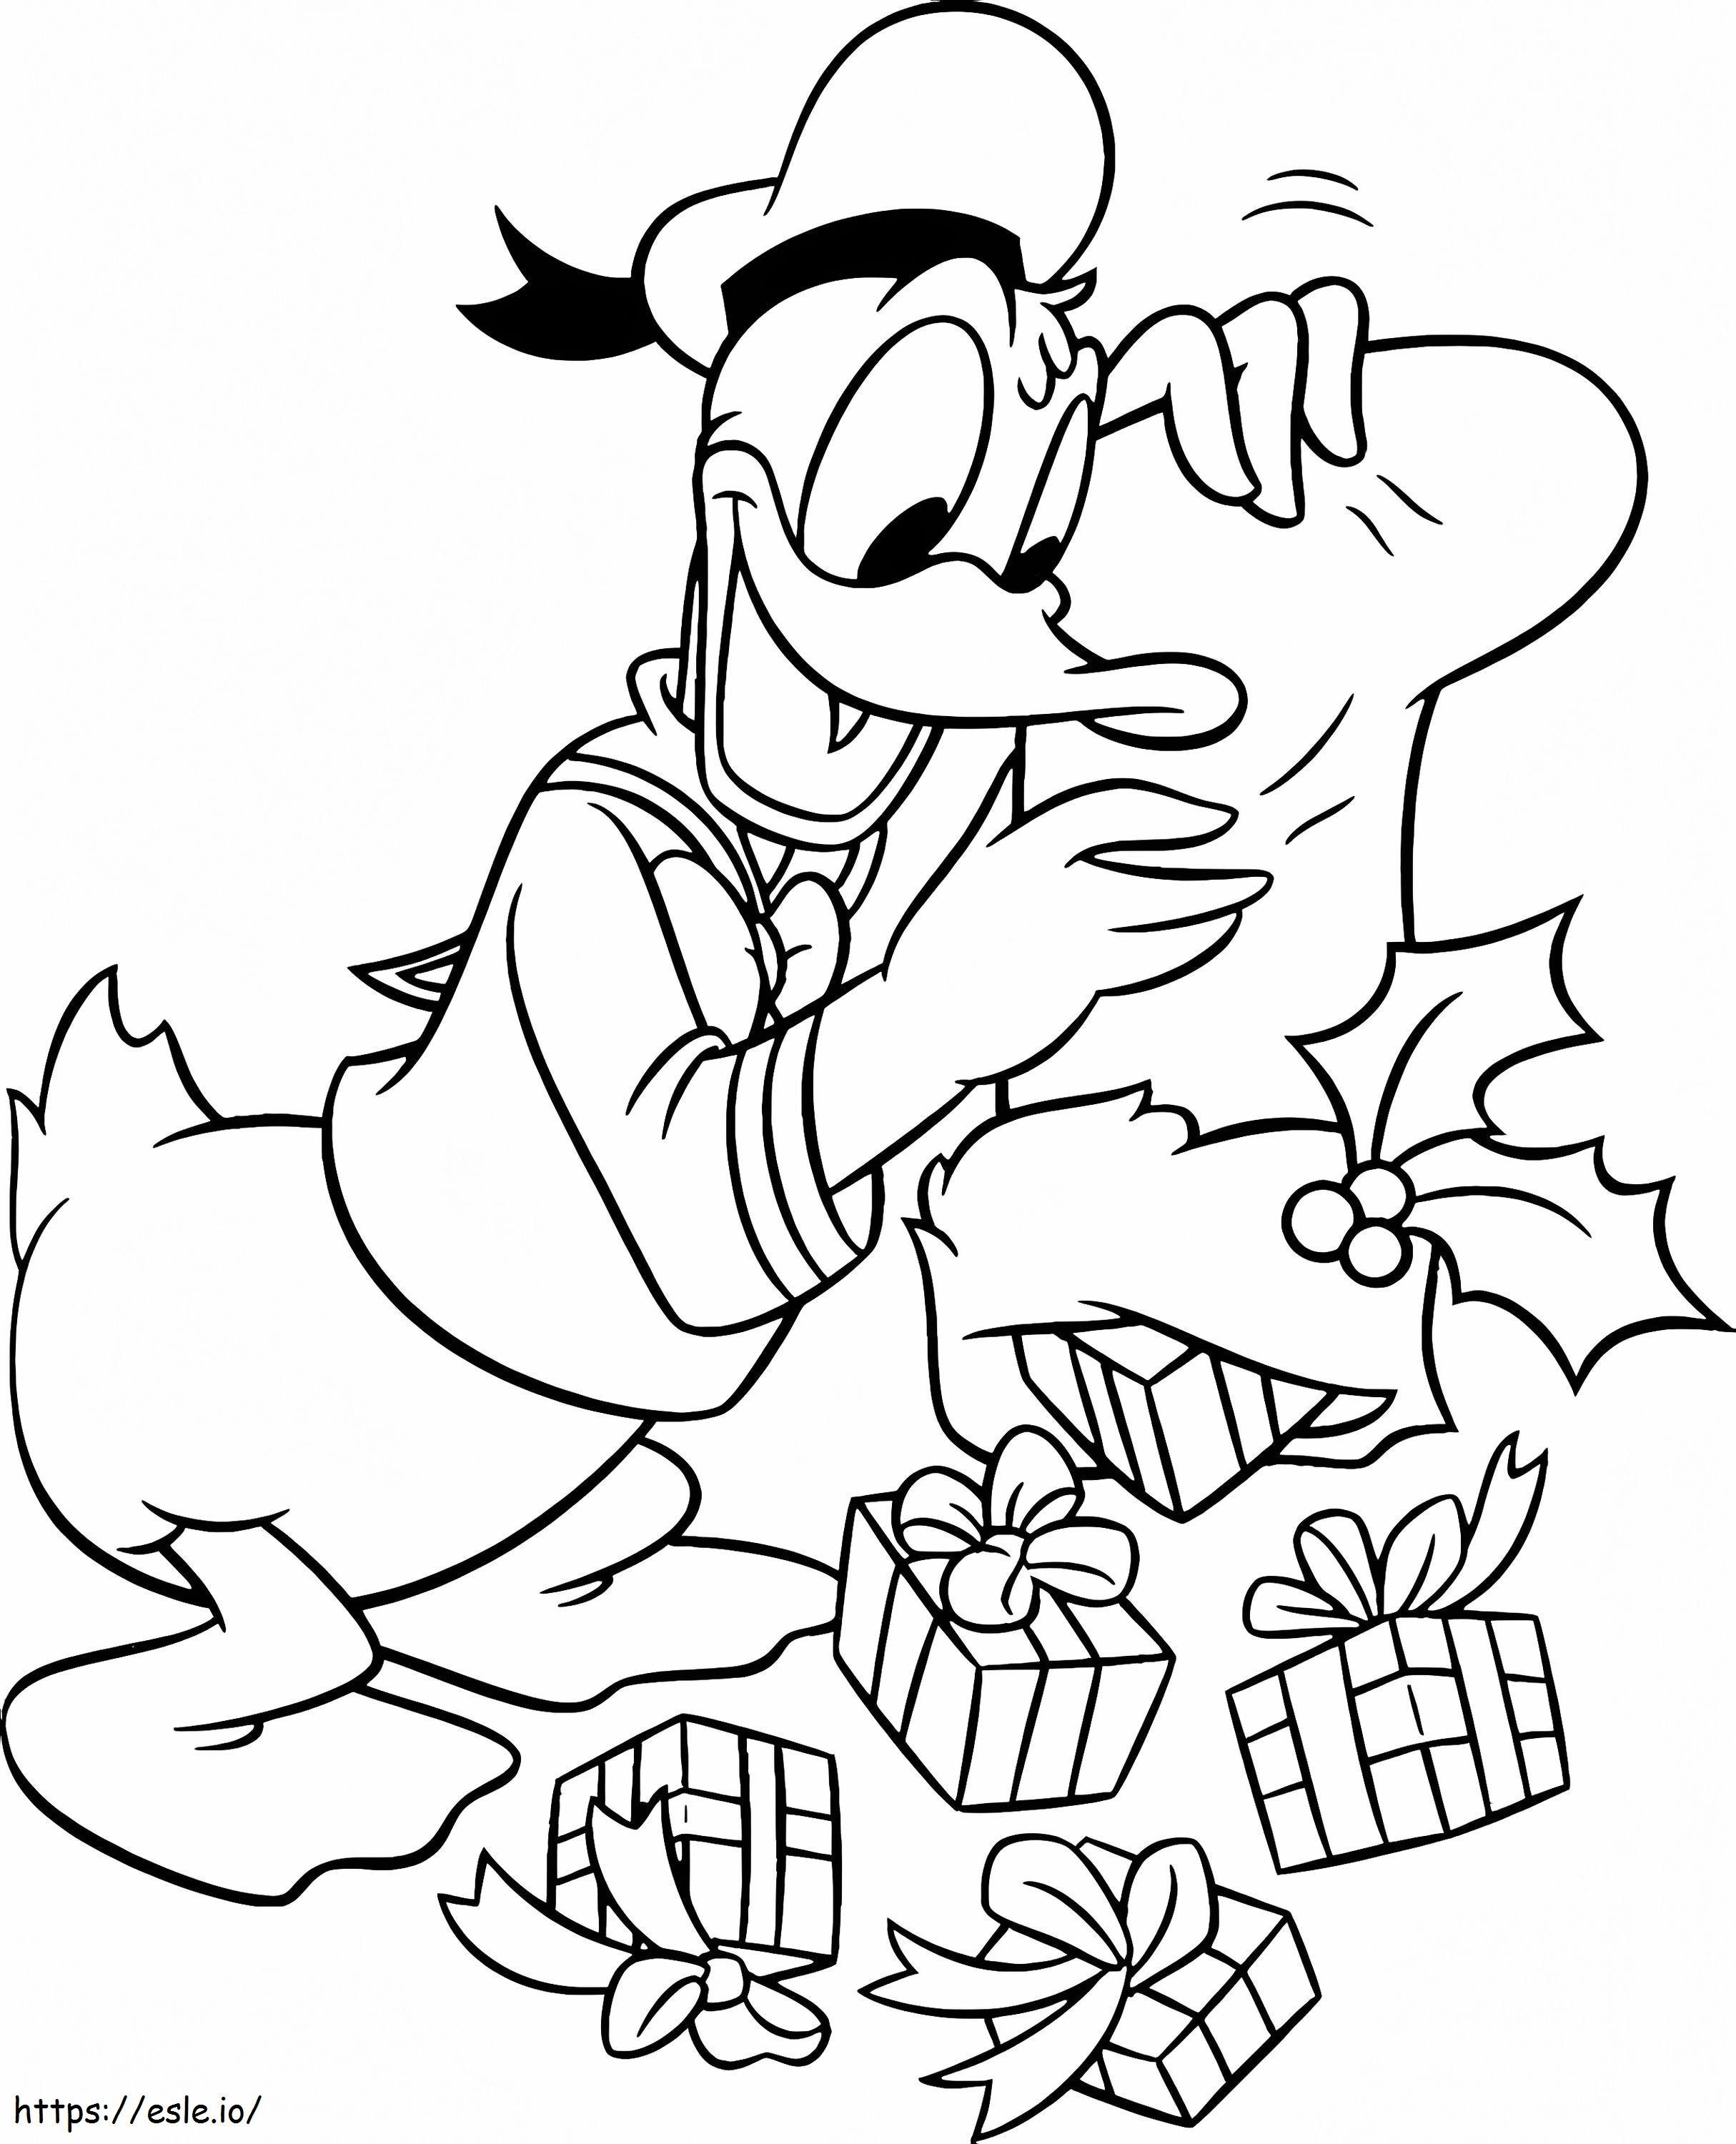 Donald Duck With Christmas Presents coloring page